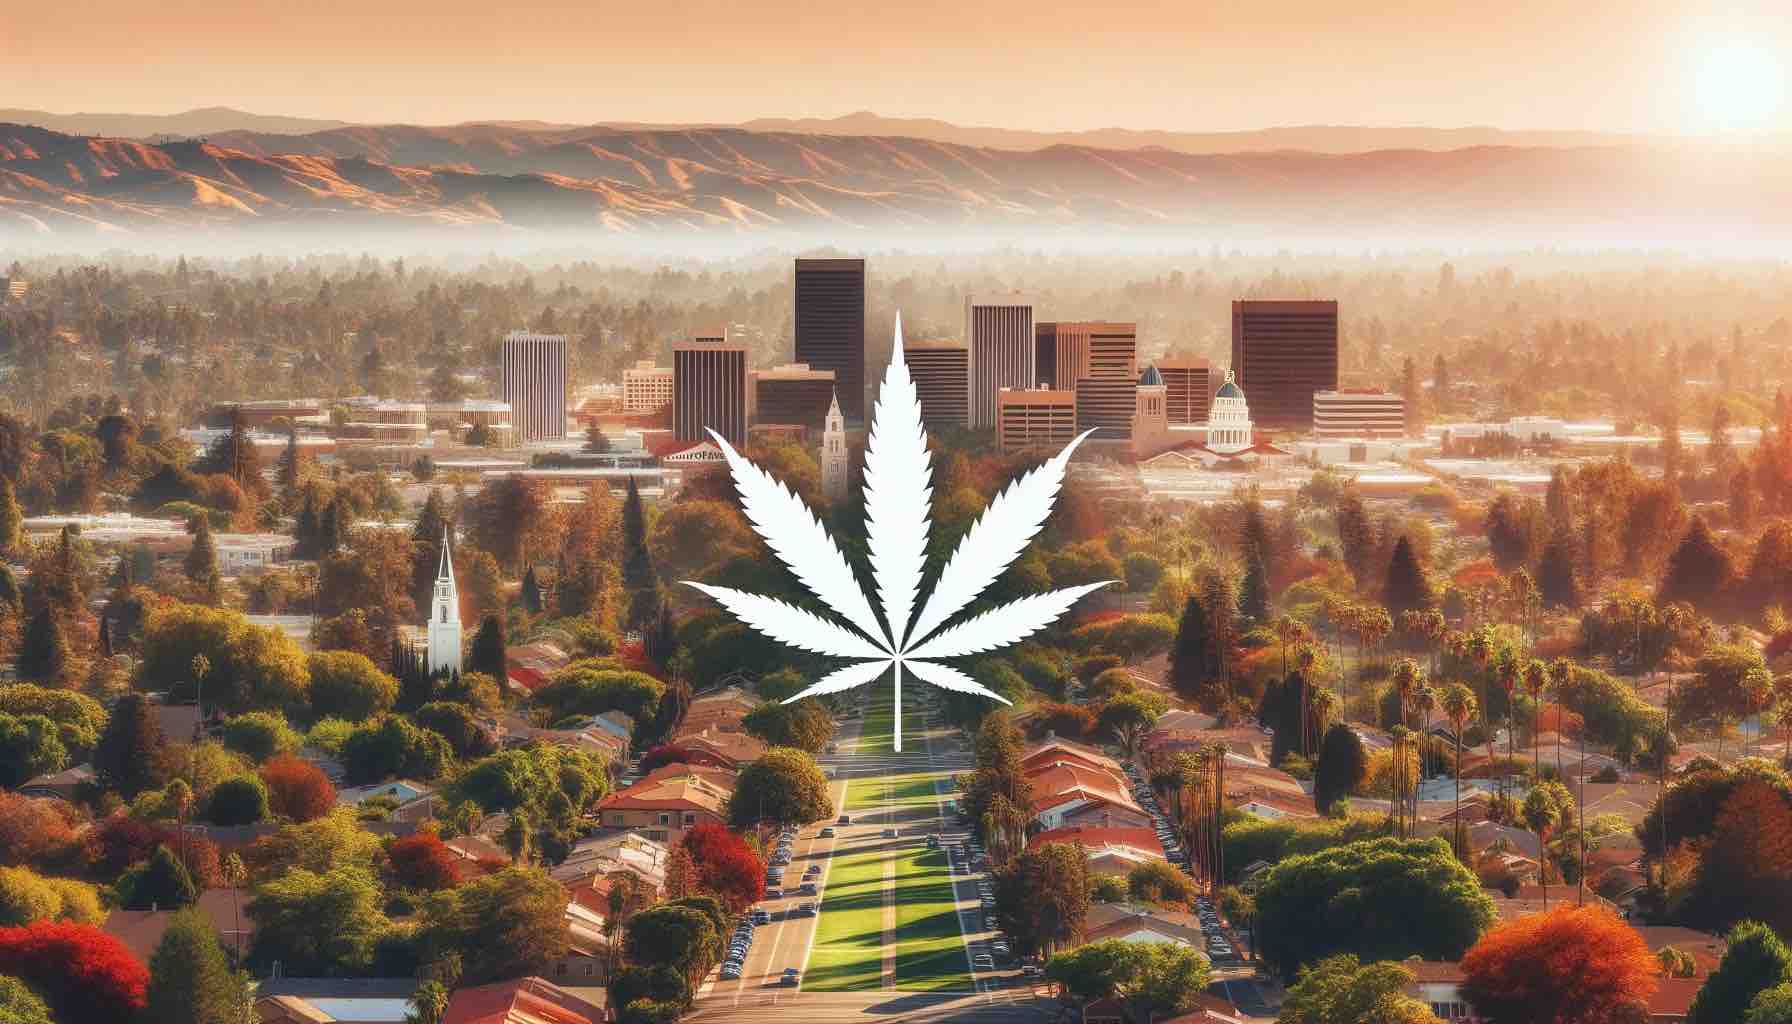 Panoramic landscape of Vista, California, with cannabis plant silhouettes against a sunset sky, symbolizing the city's dispensaries.